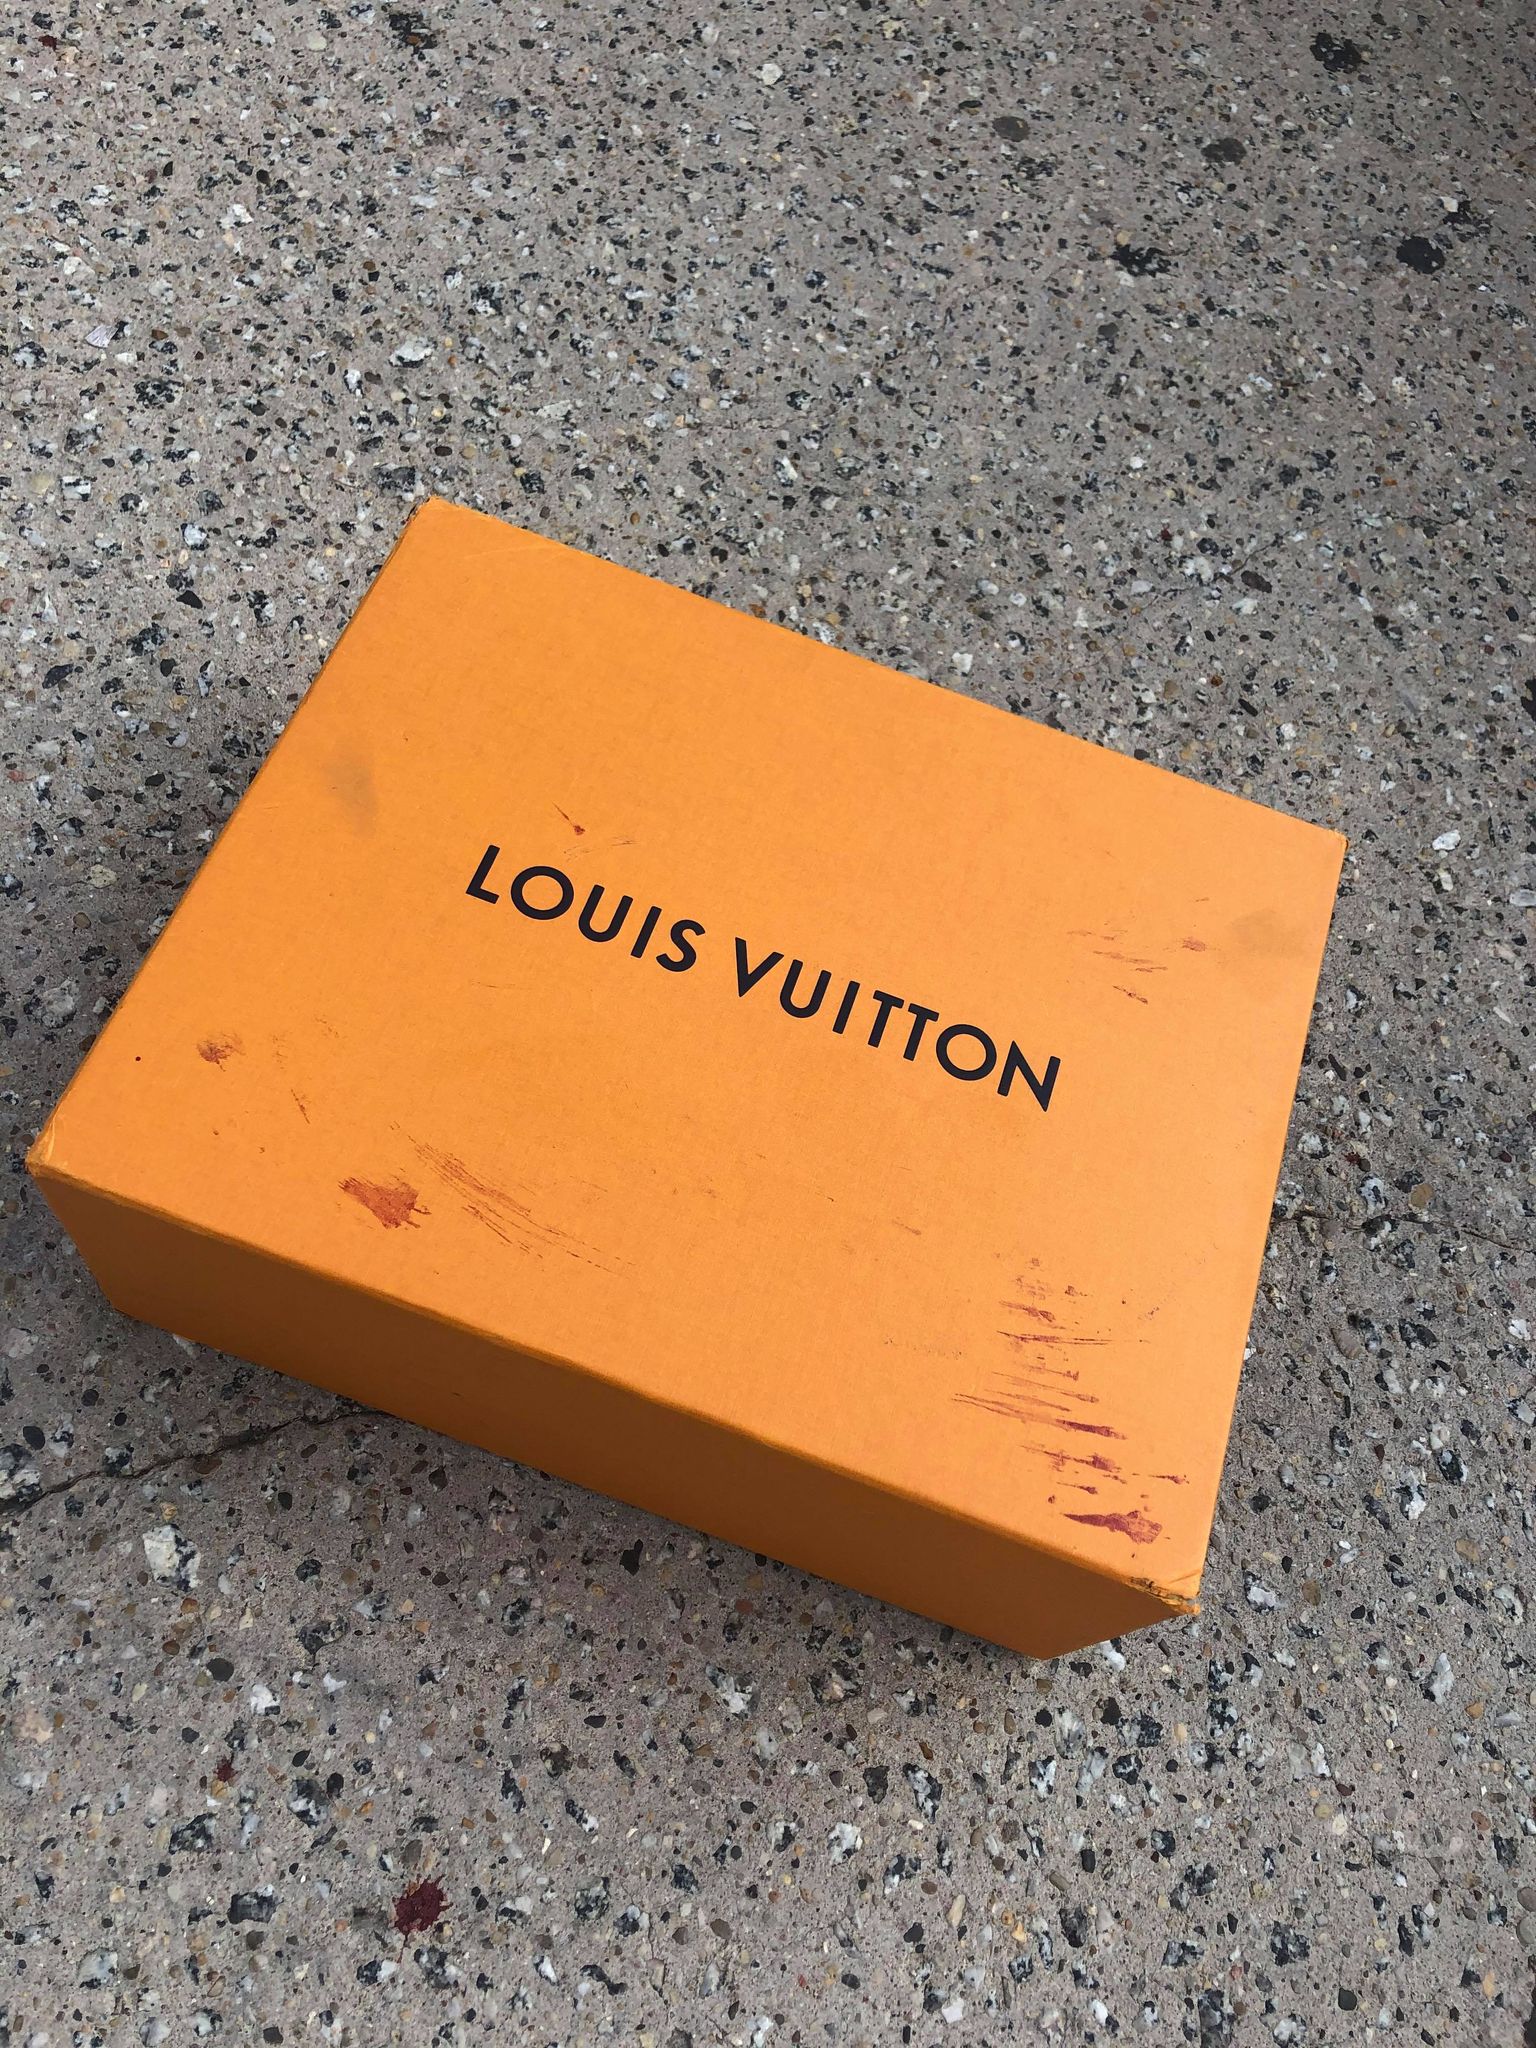 Chicago Louis Vuitton store protested for use of animal fur